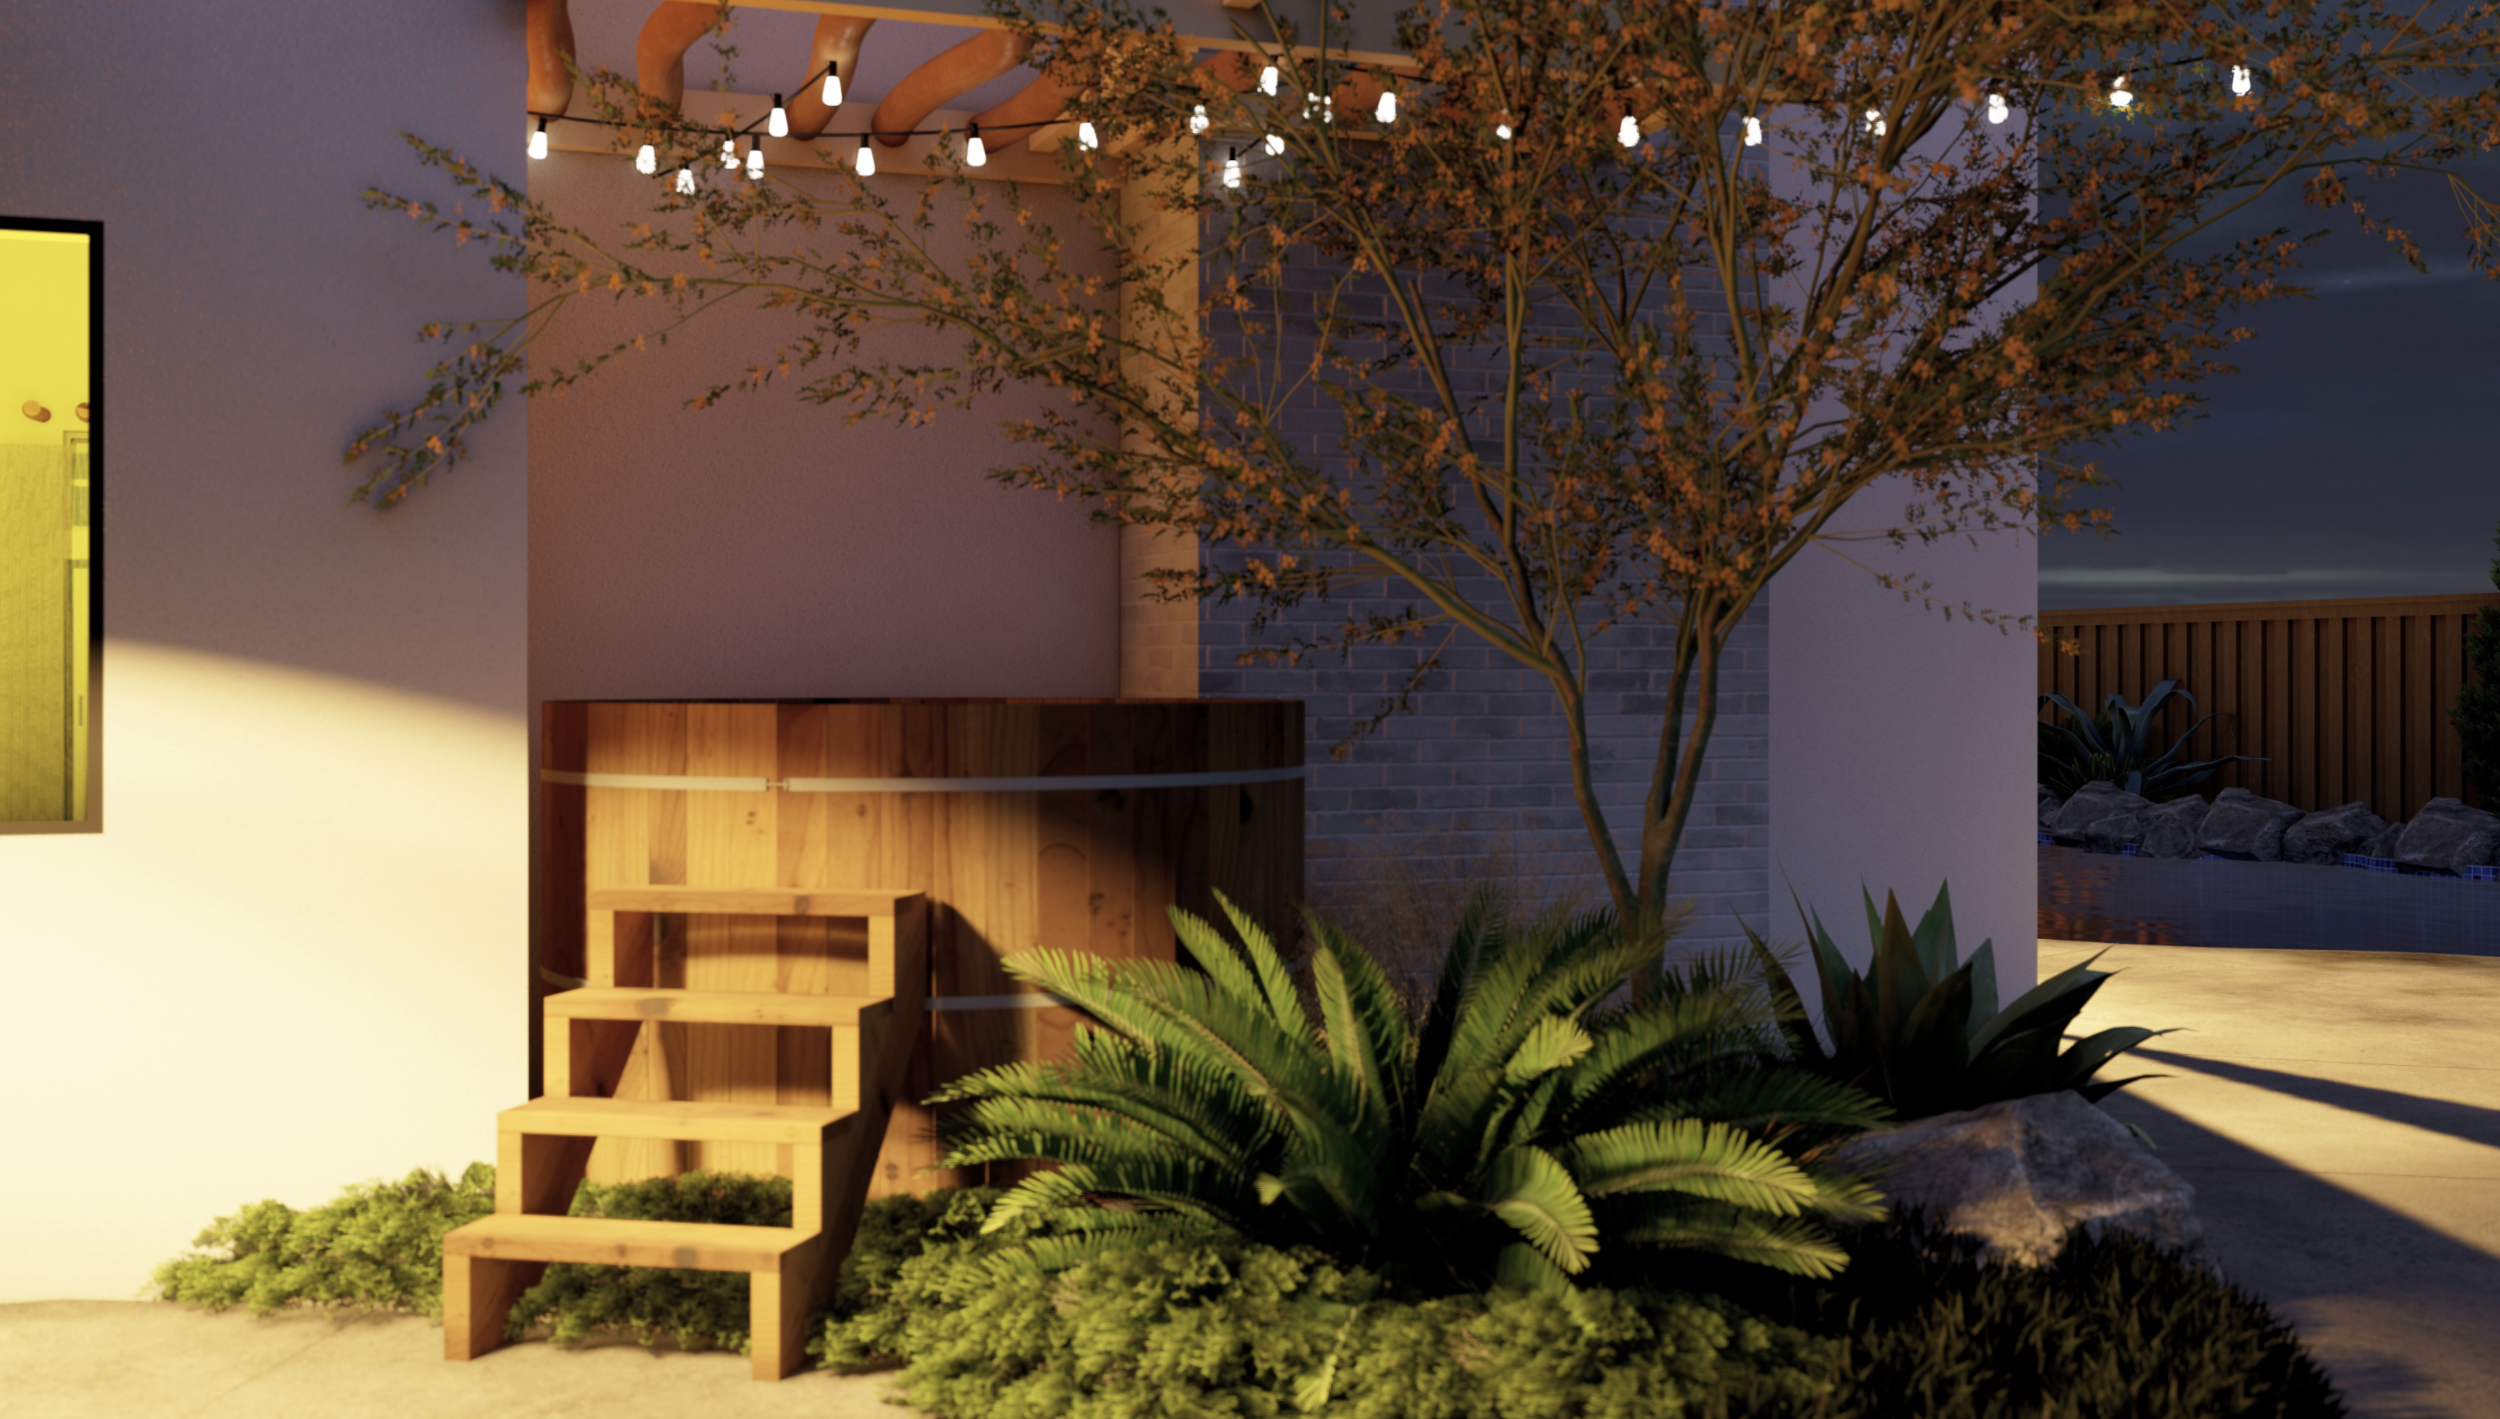 Cozy backyard design with wooden hot tub and string lights in elk grove, ca.